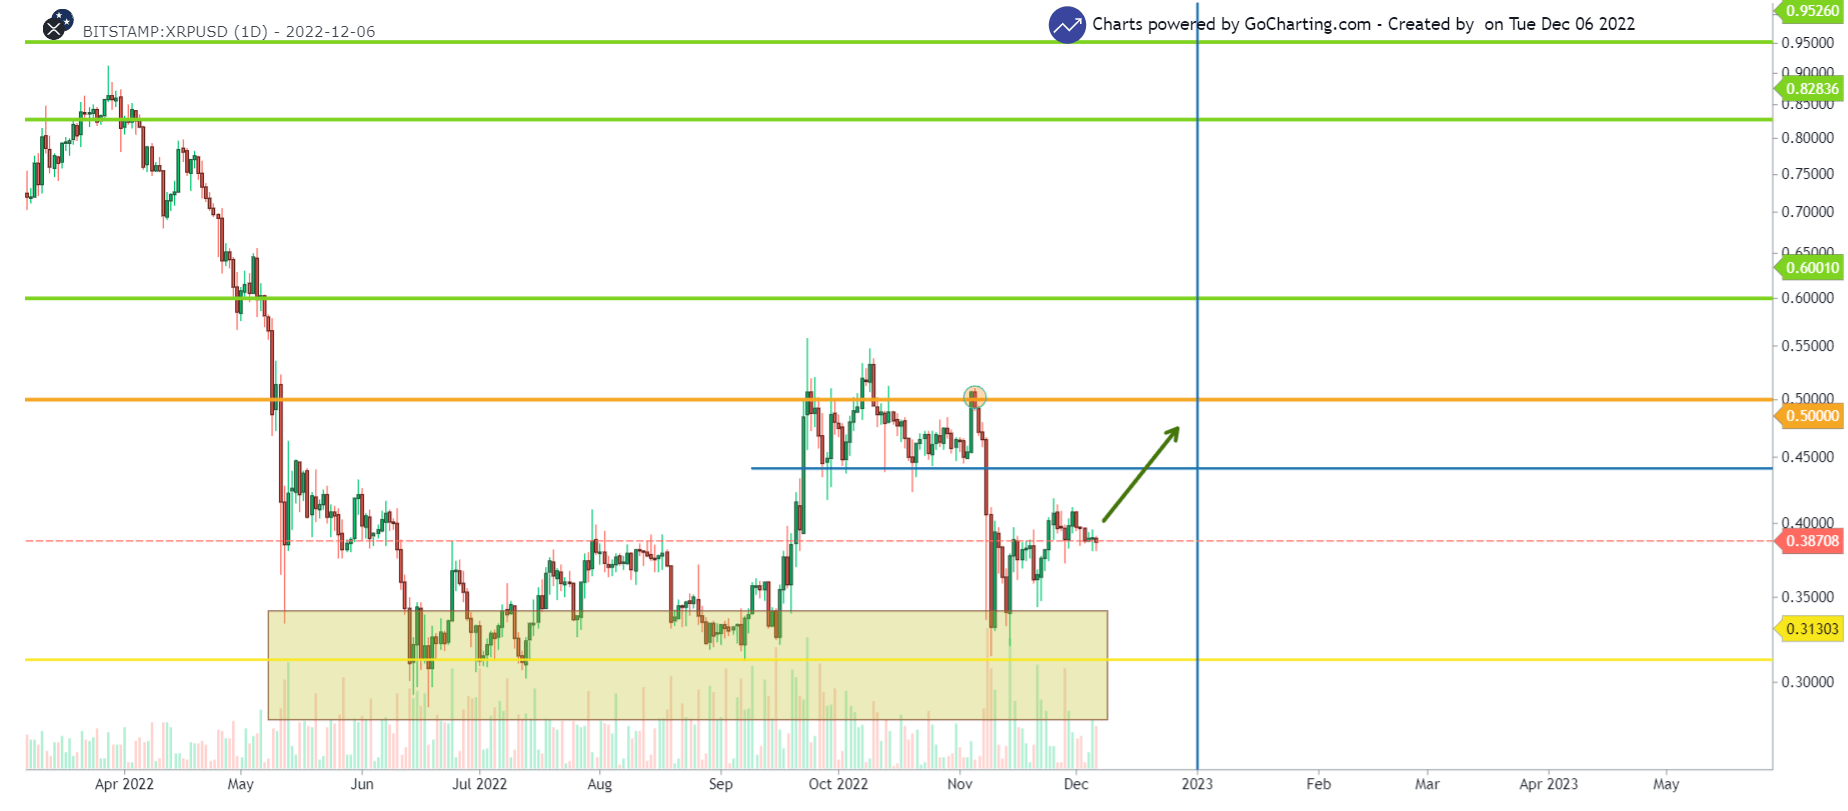 XRP/USD 1-day chart showing the XRP prediction for the end of 2022